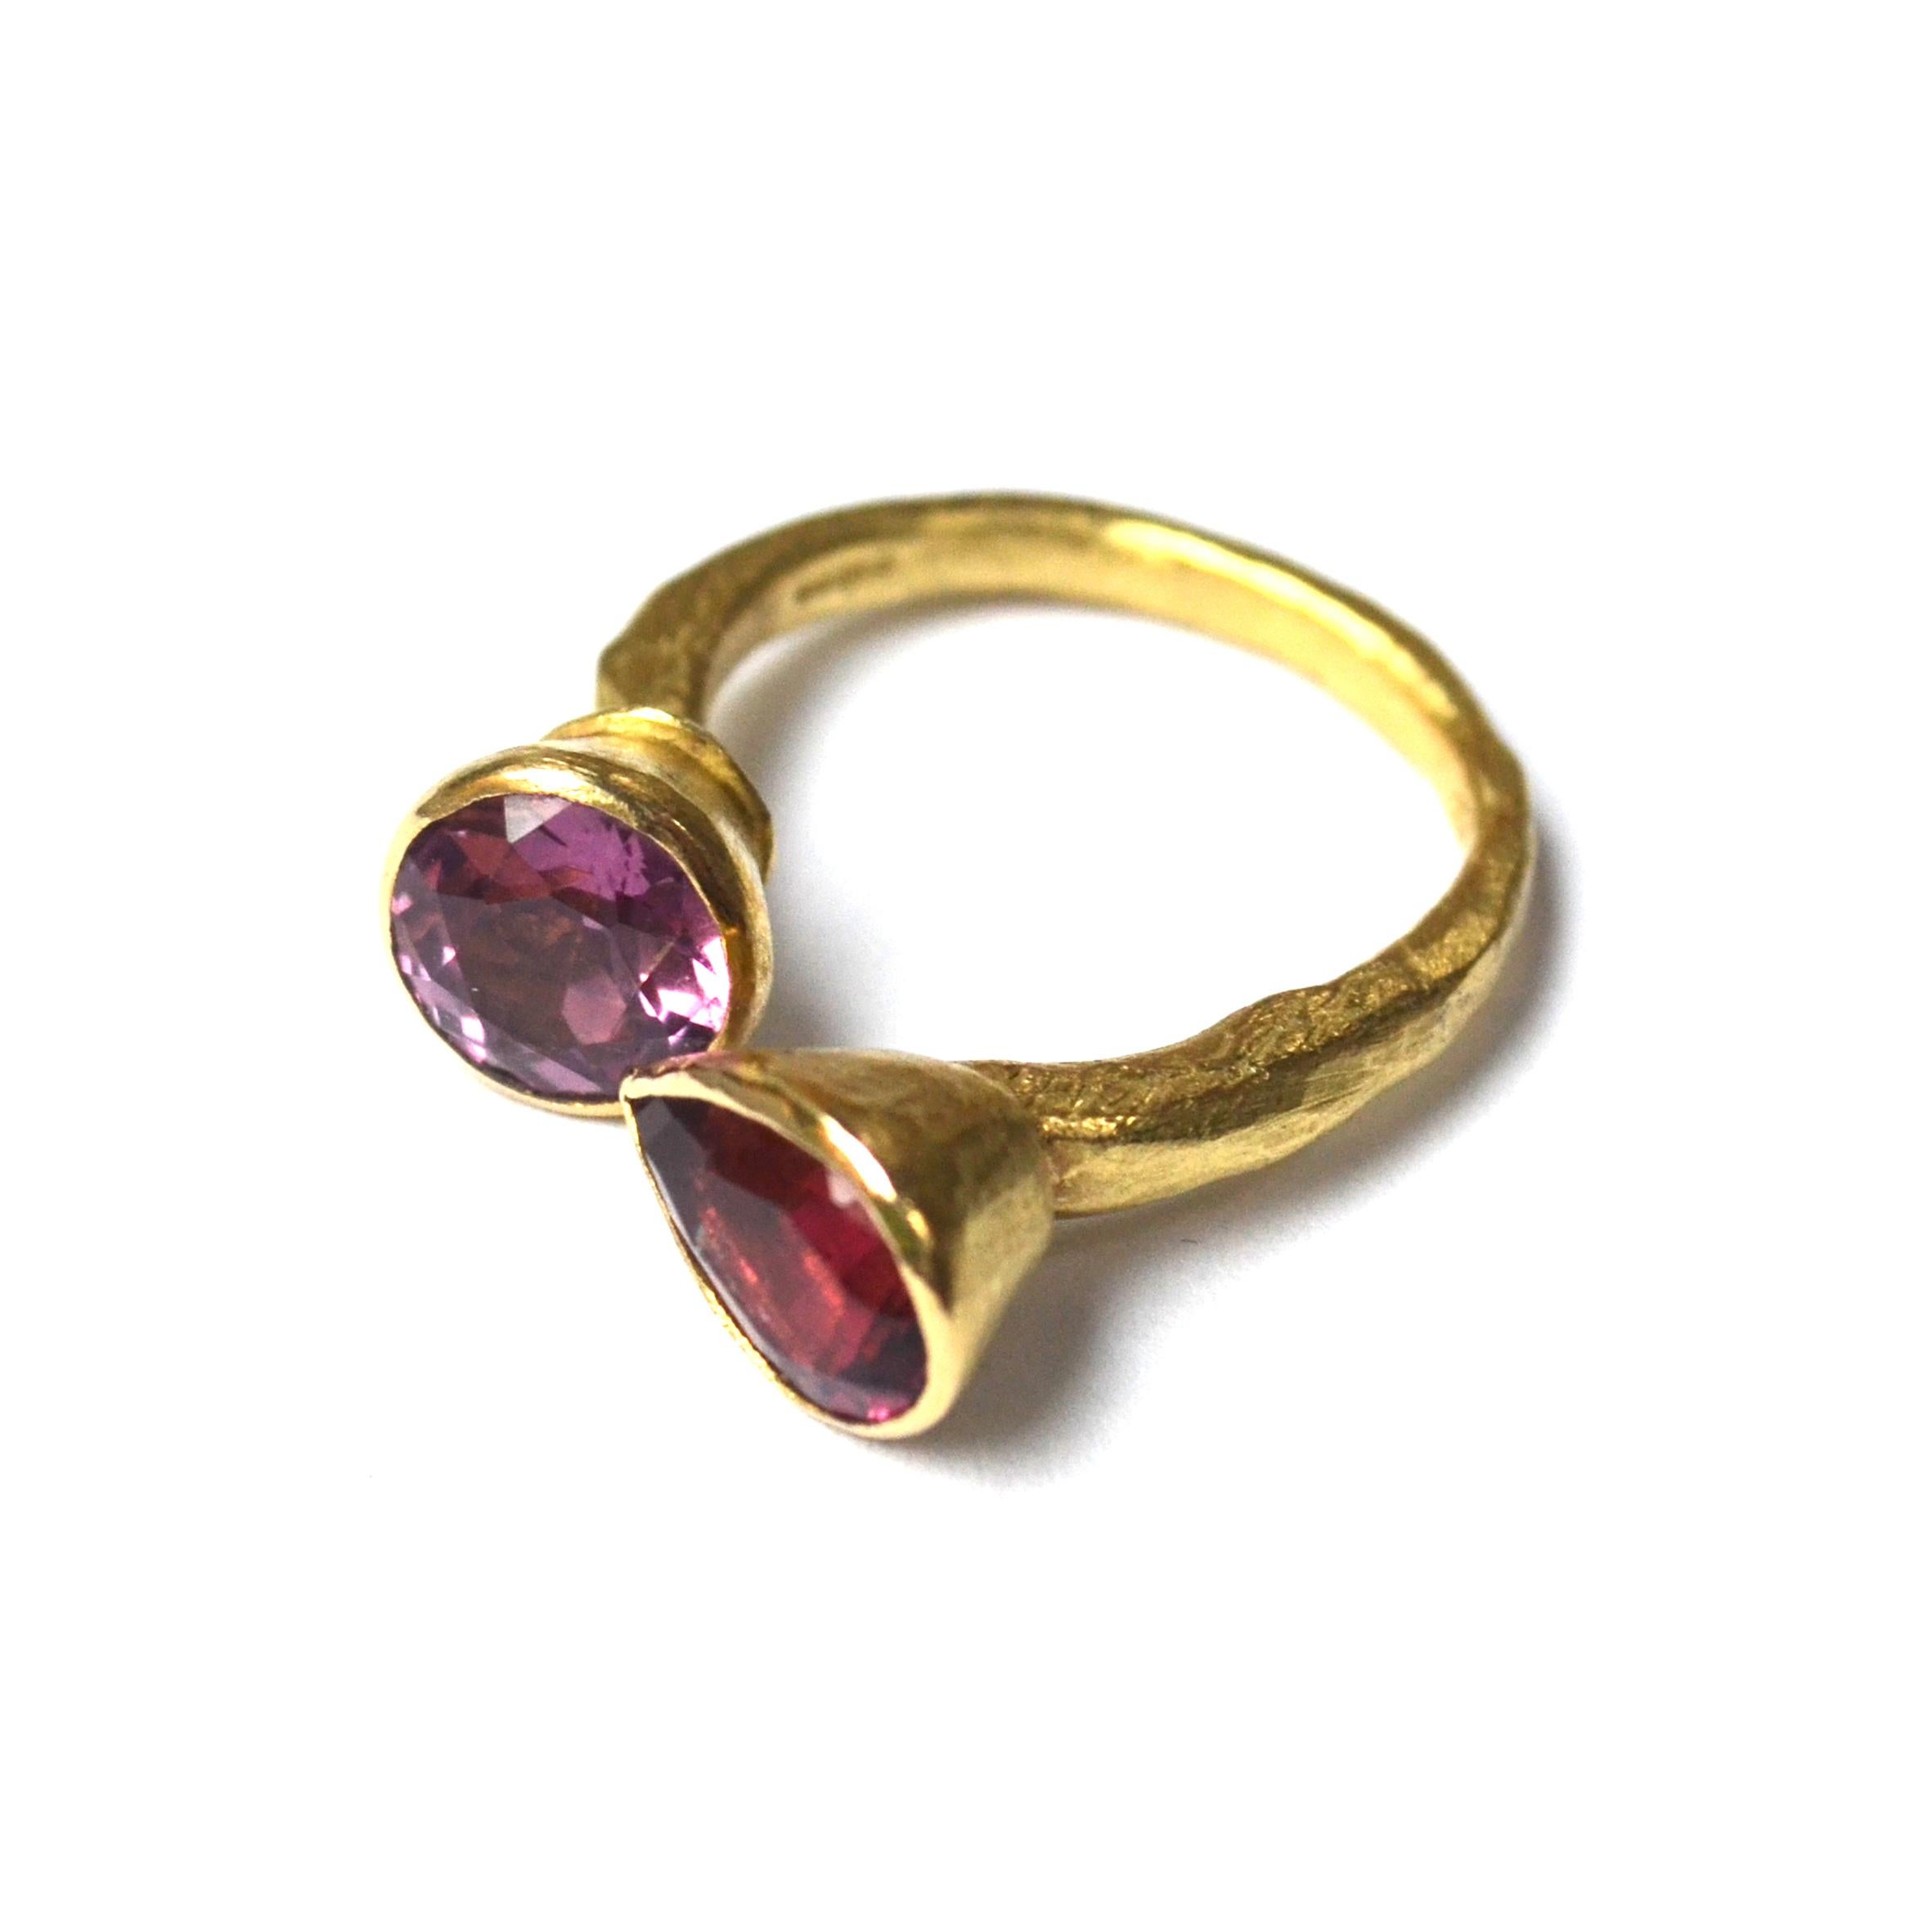 18k yellow gold organic textured open ring with two pink tourmalines, one pear cut approx 2cts and one round cut approx 2cts.
Disa Allsopp is an internationally renowned goldsmith based in London UK. She is known for her textural surfaces and